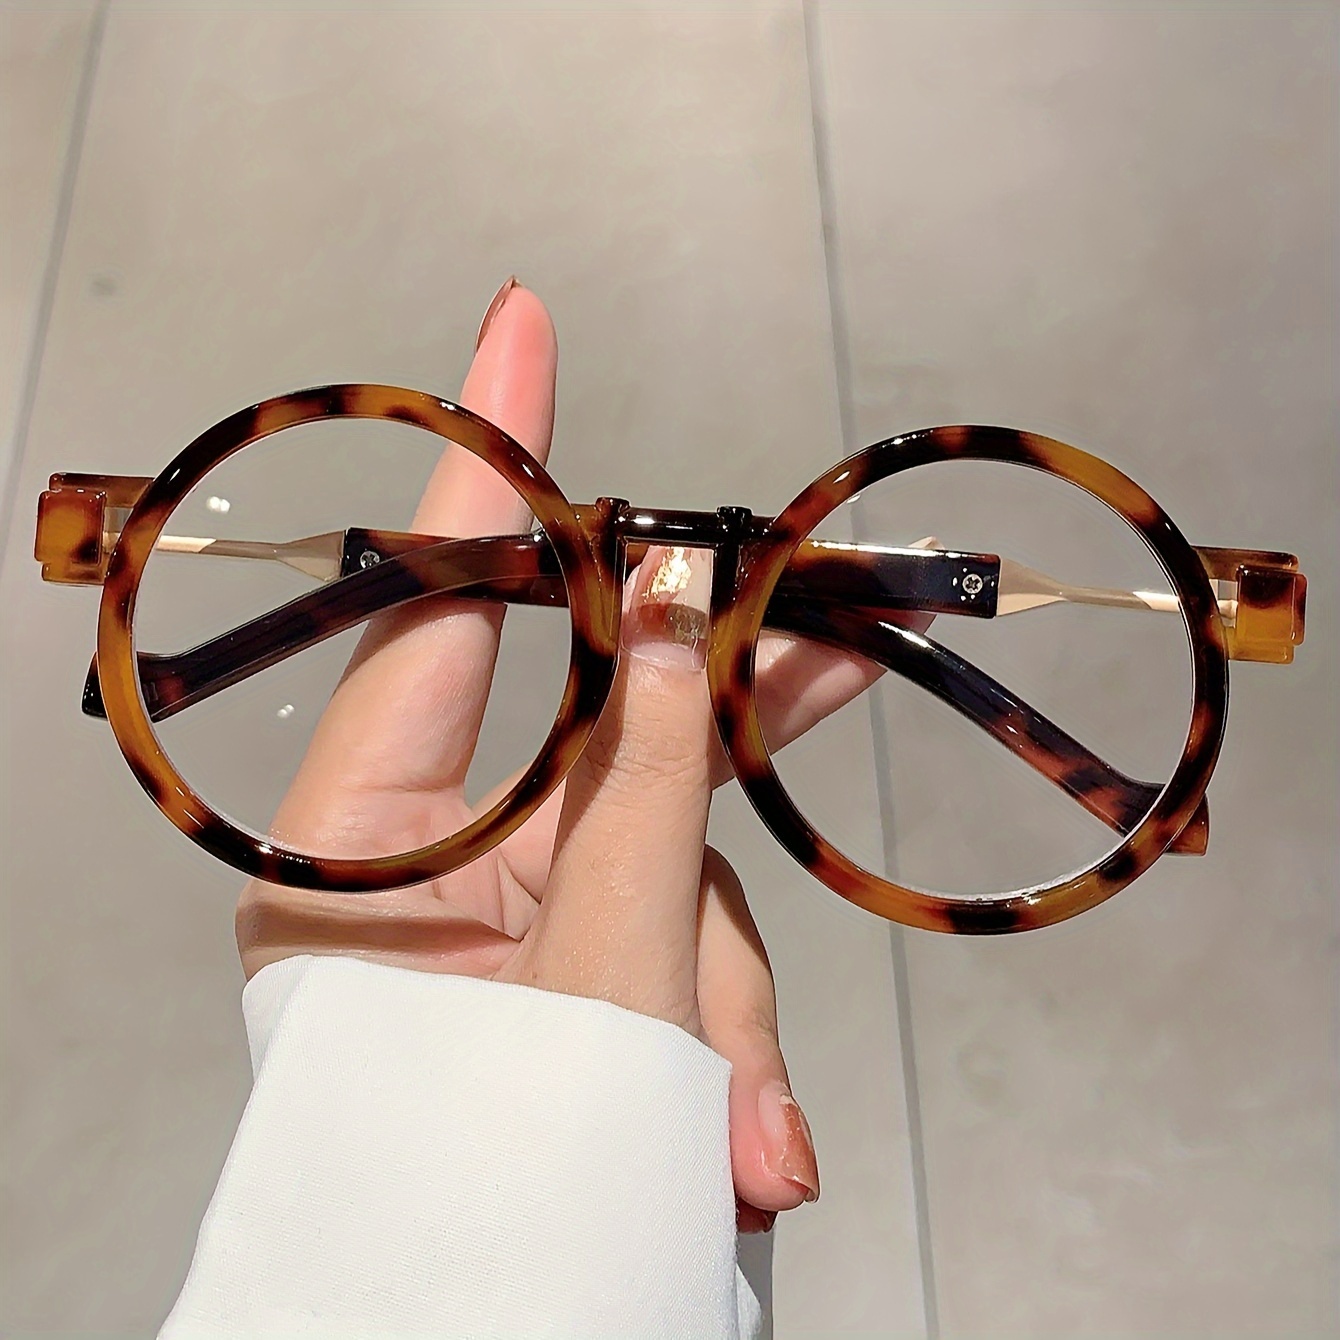 

Retro Round Frame Clear Lens Glasses Leopard Fashion Computer Glasses Spectacles For Women